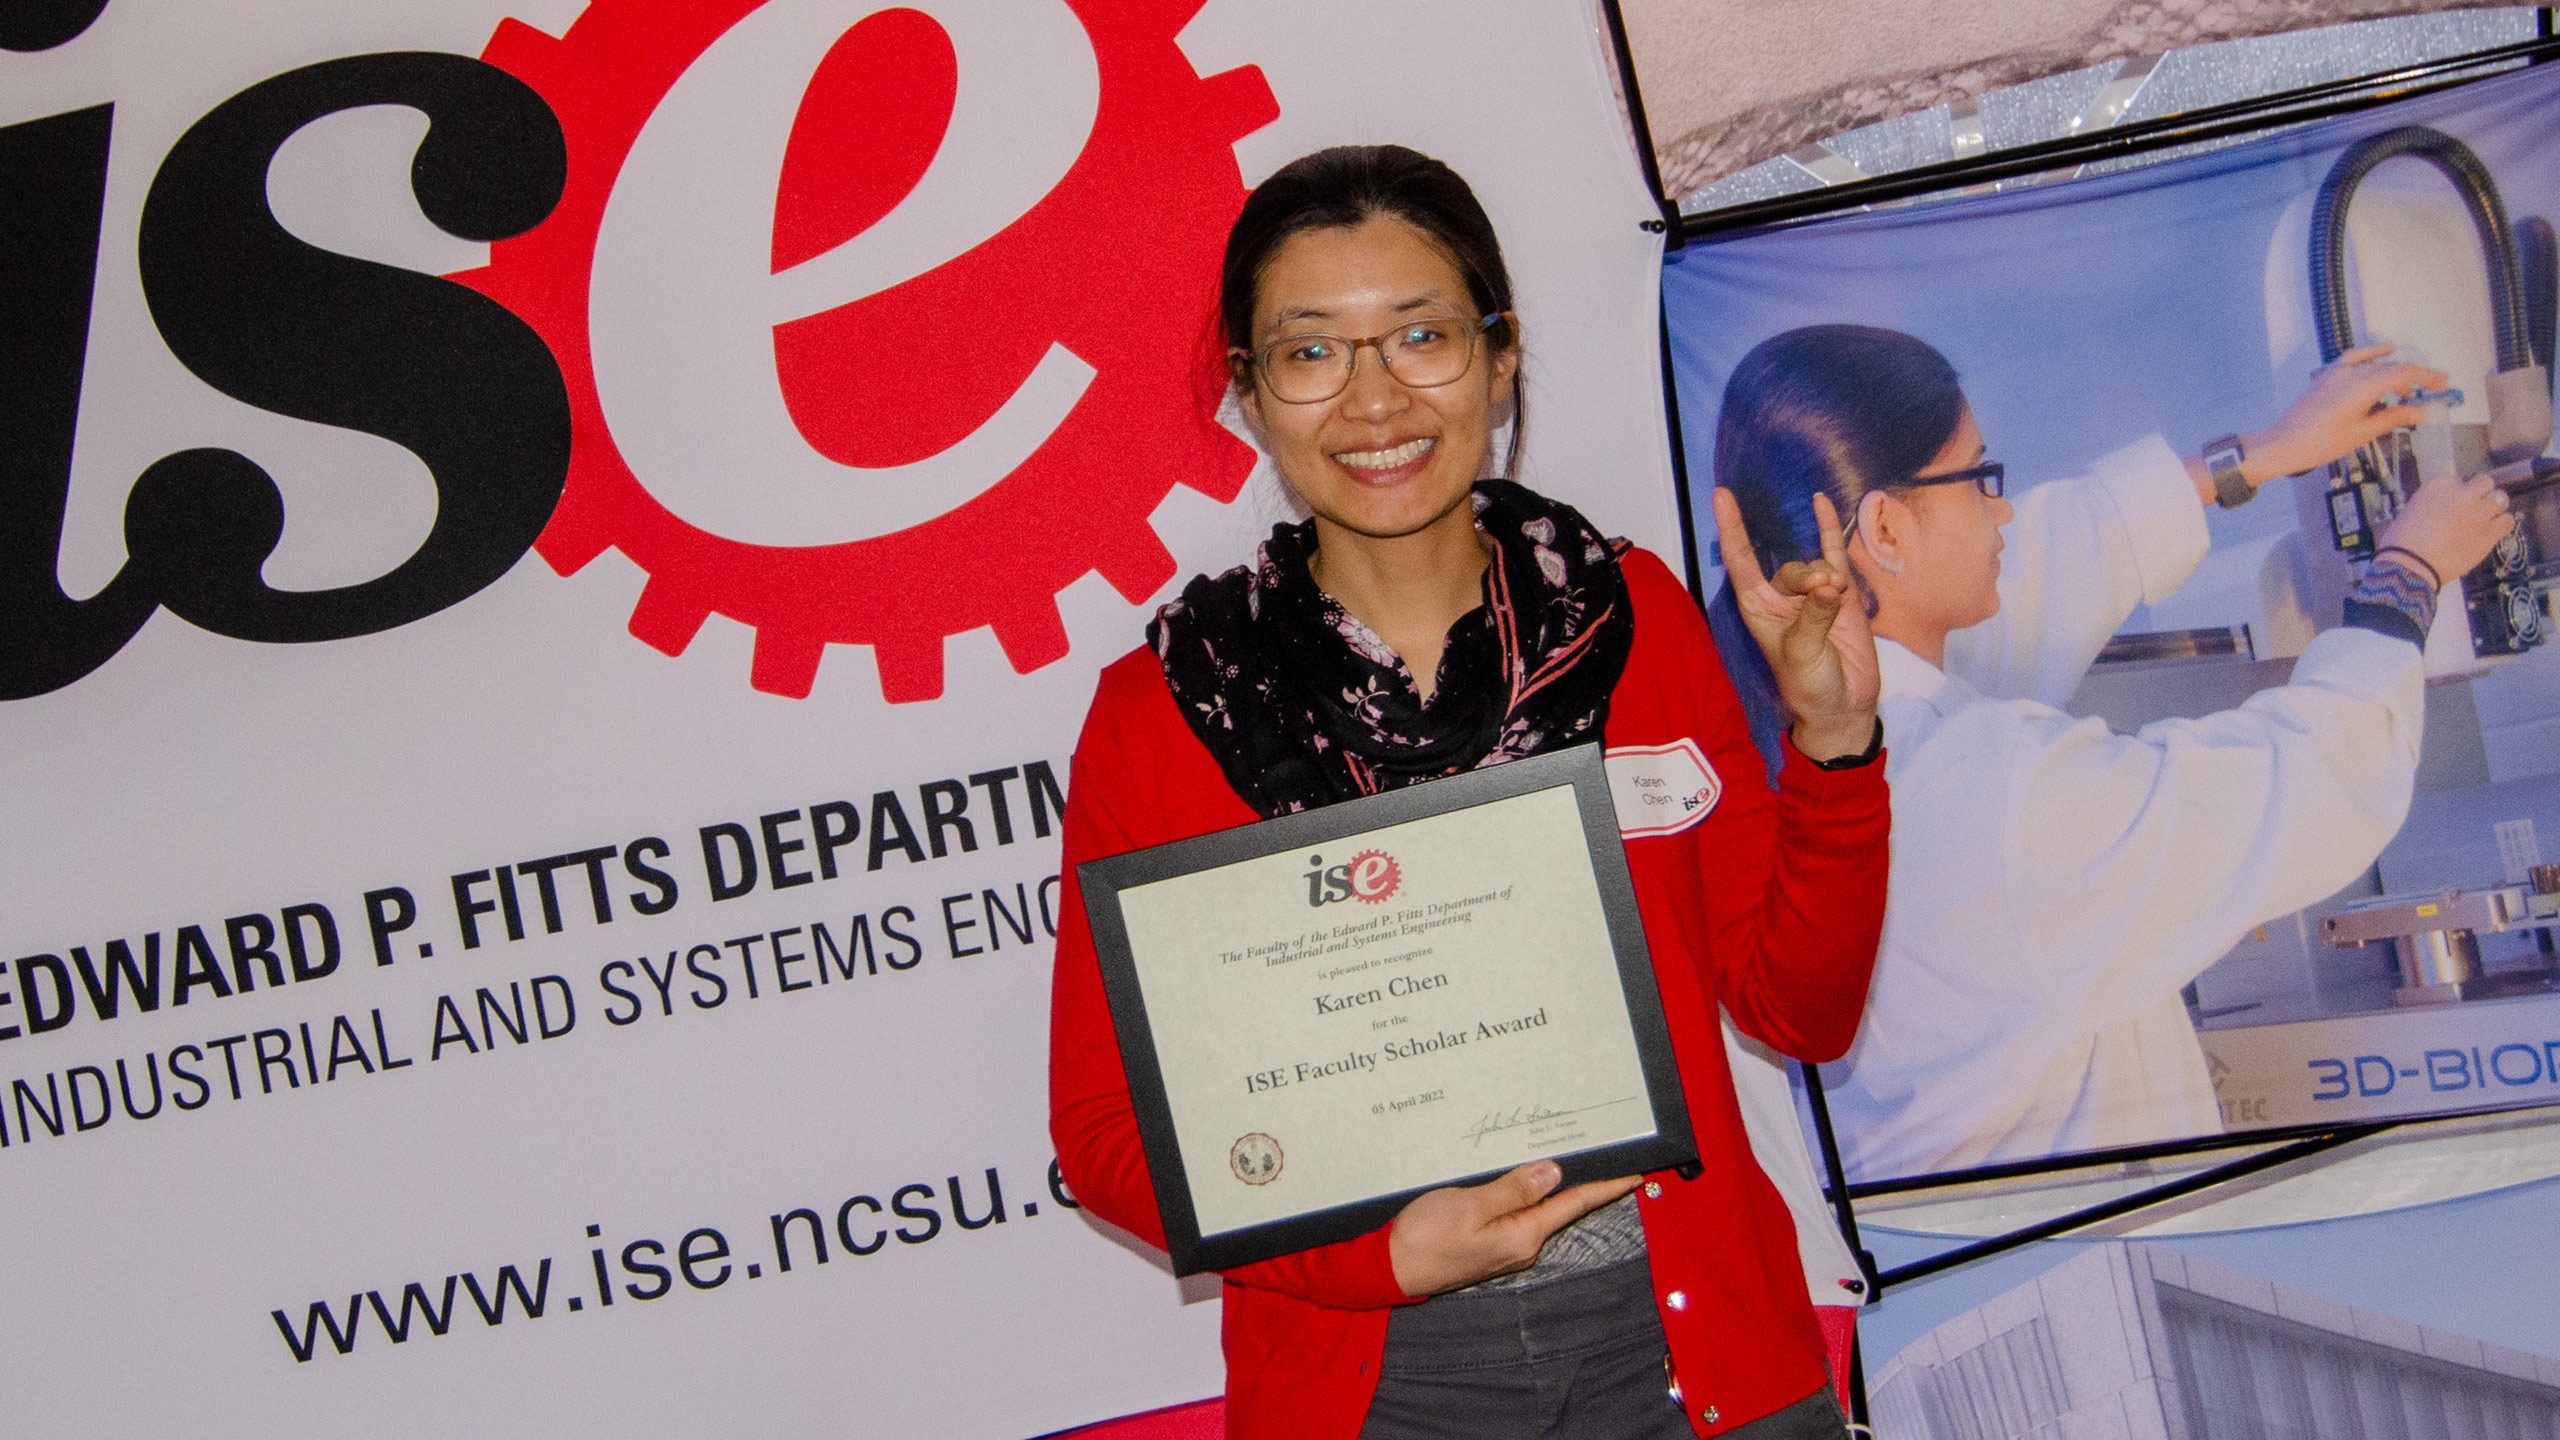 Assistant Professor Karen Chen receiving the Outstanding Faculty Scholar Award at the 2022 C.A. Anderson Awards